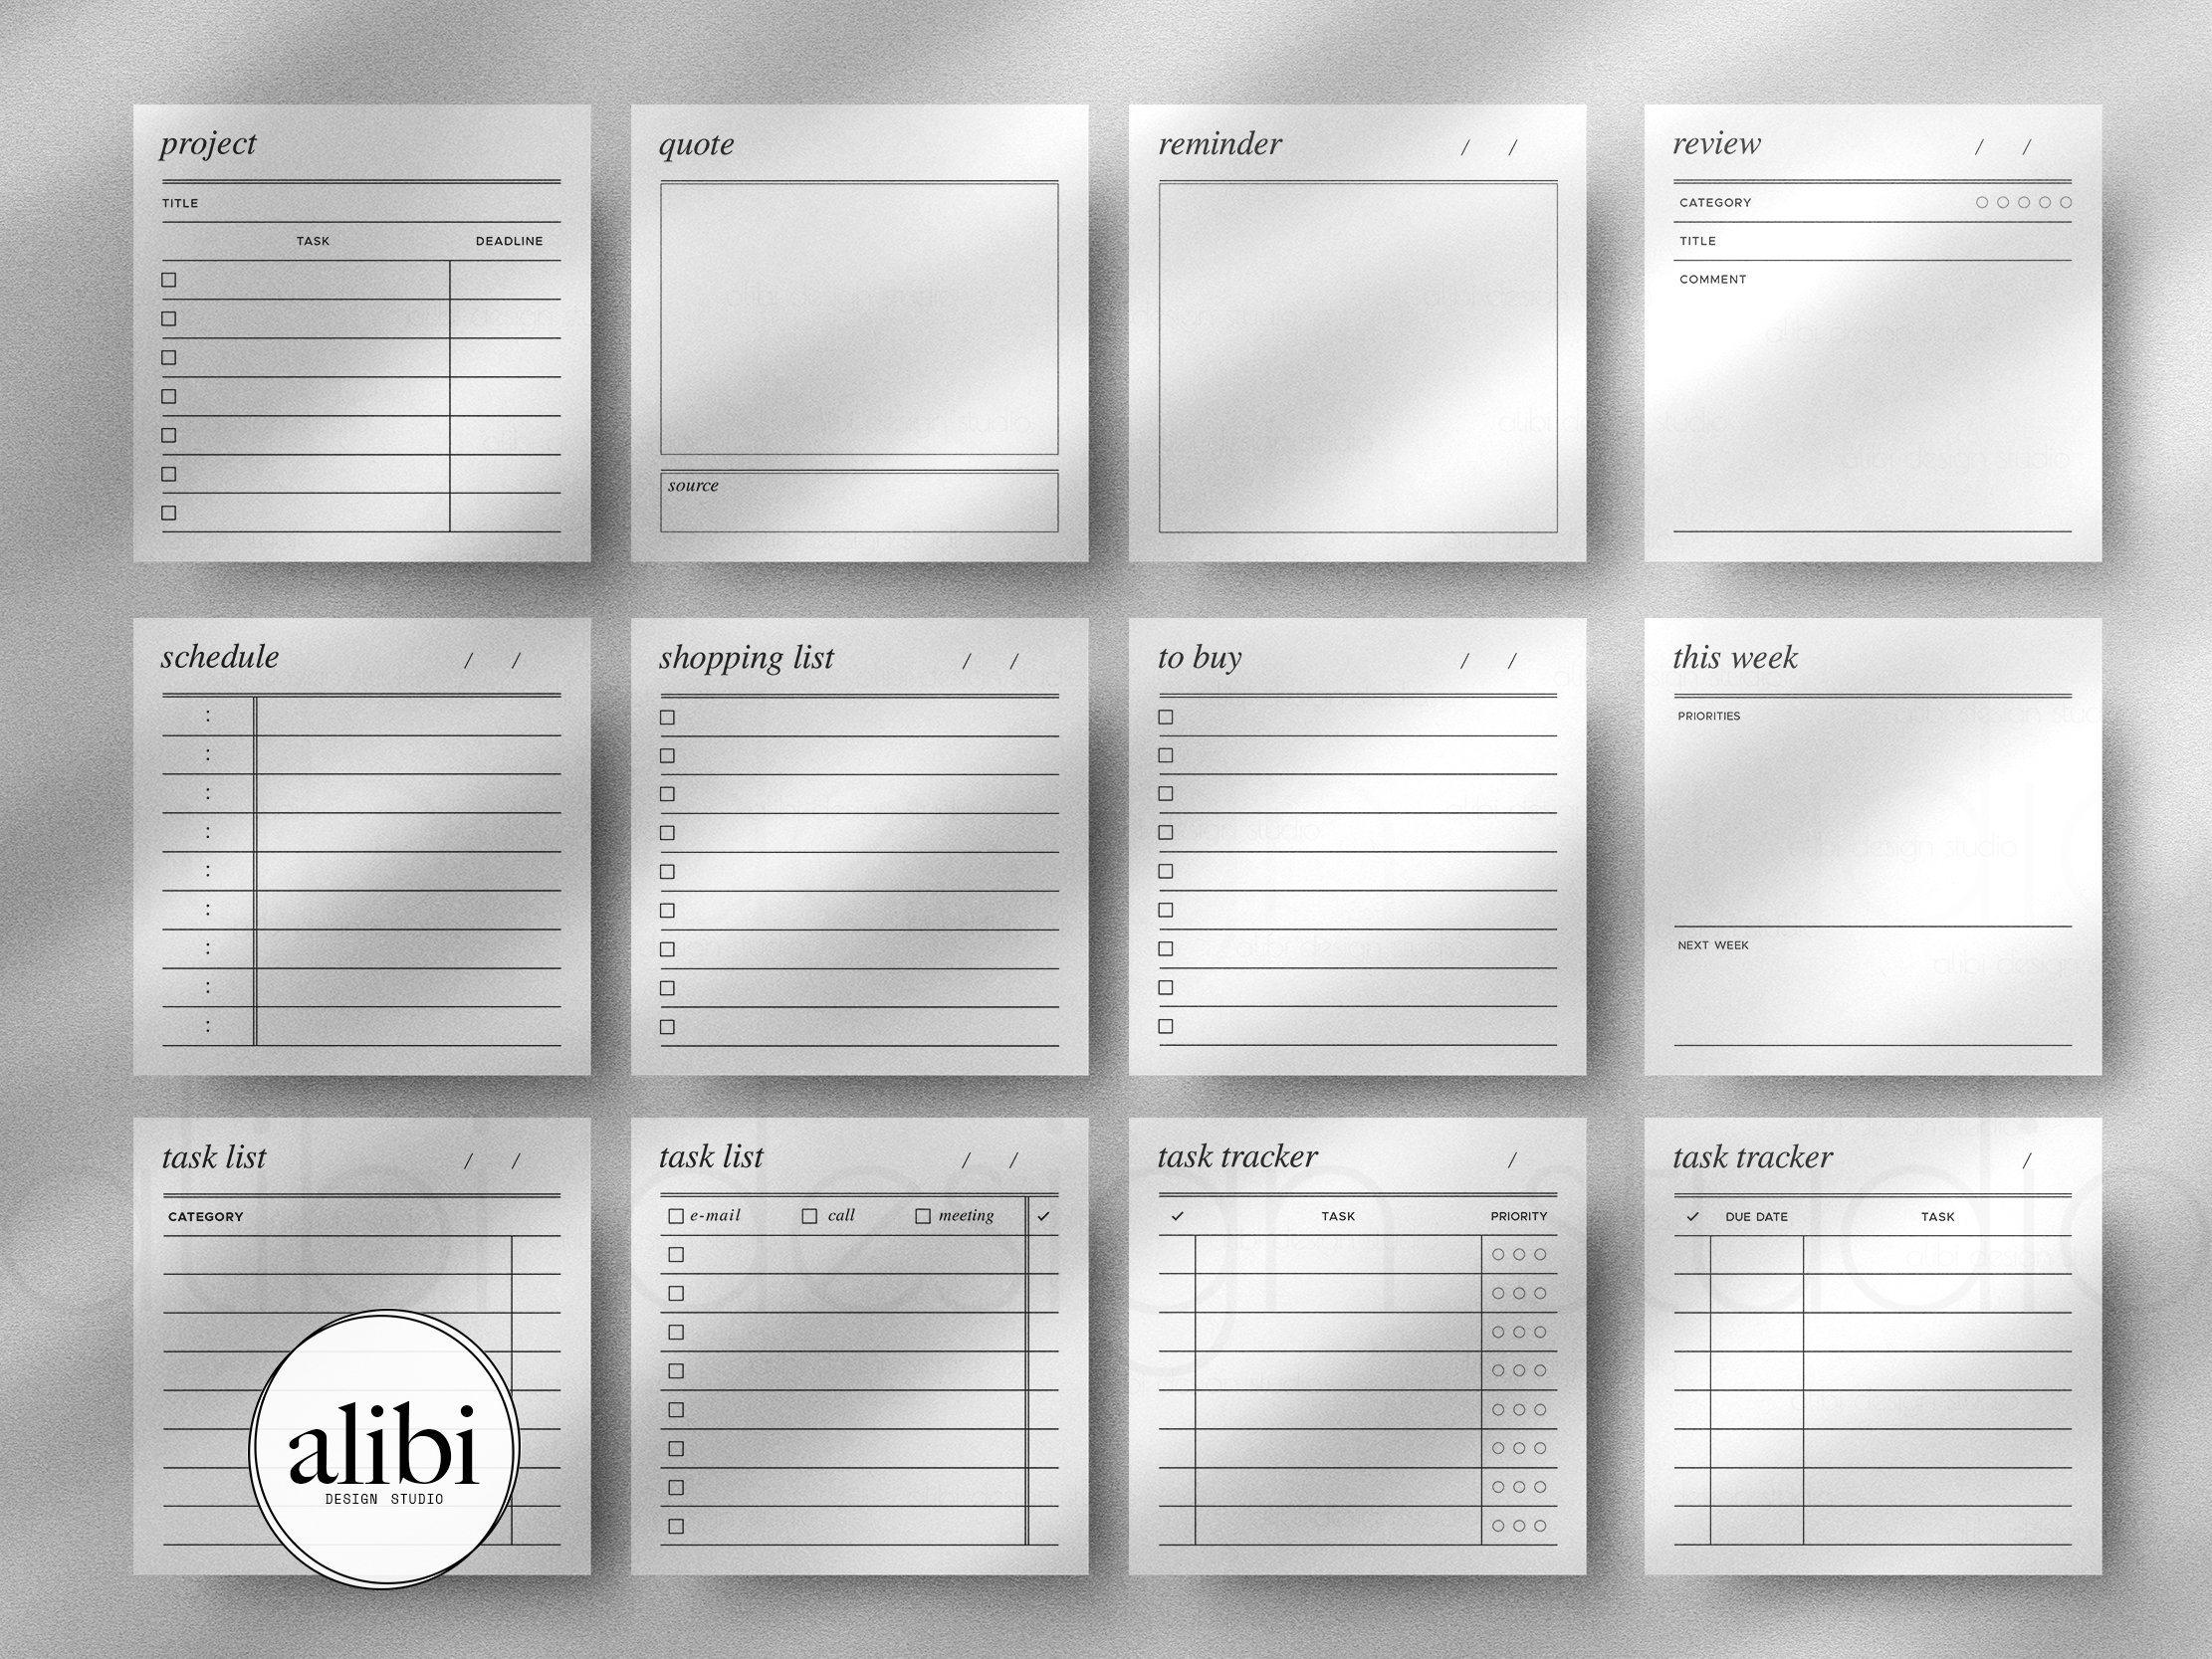 Extra Large Sticky Notes Unique & Pretty Abstract Design To-do List for  Planning Daily and Weekly Projects, 10 X 6 Free U.S. Shipping 